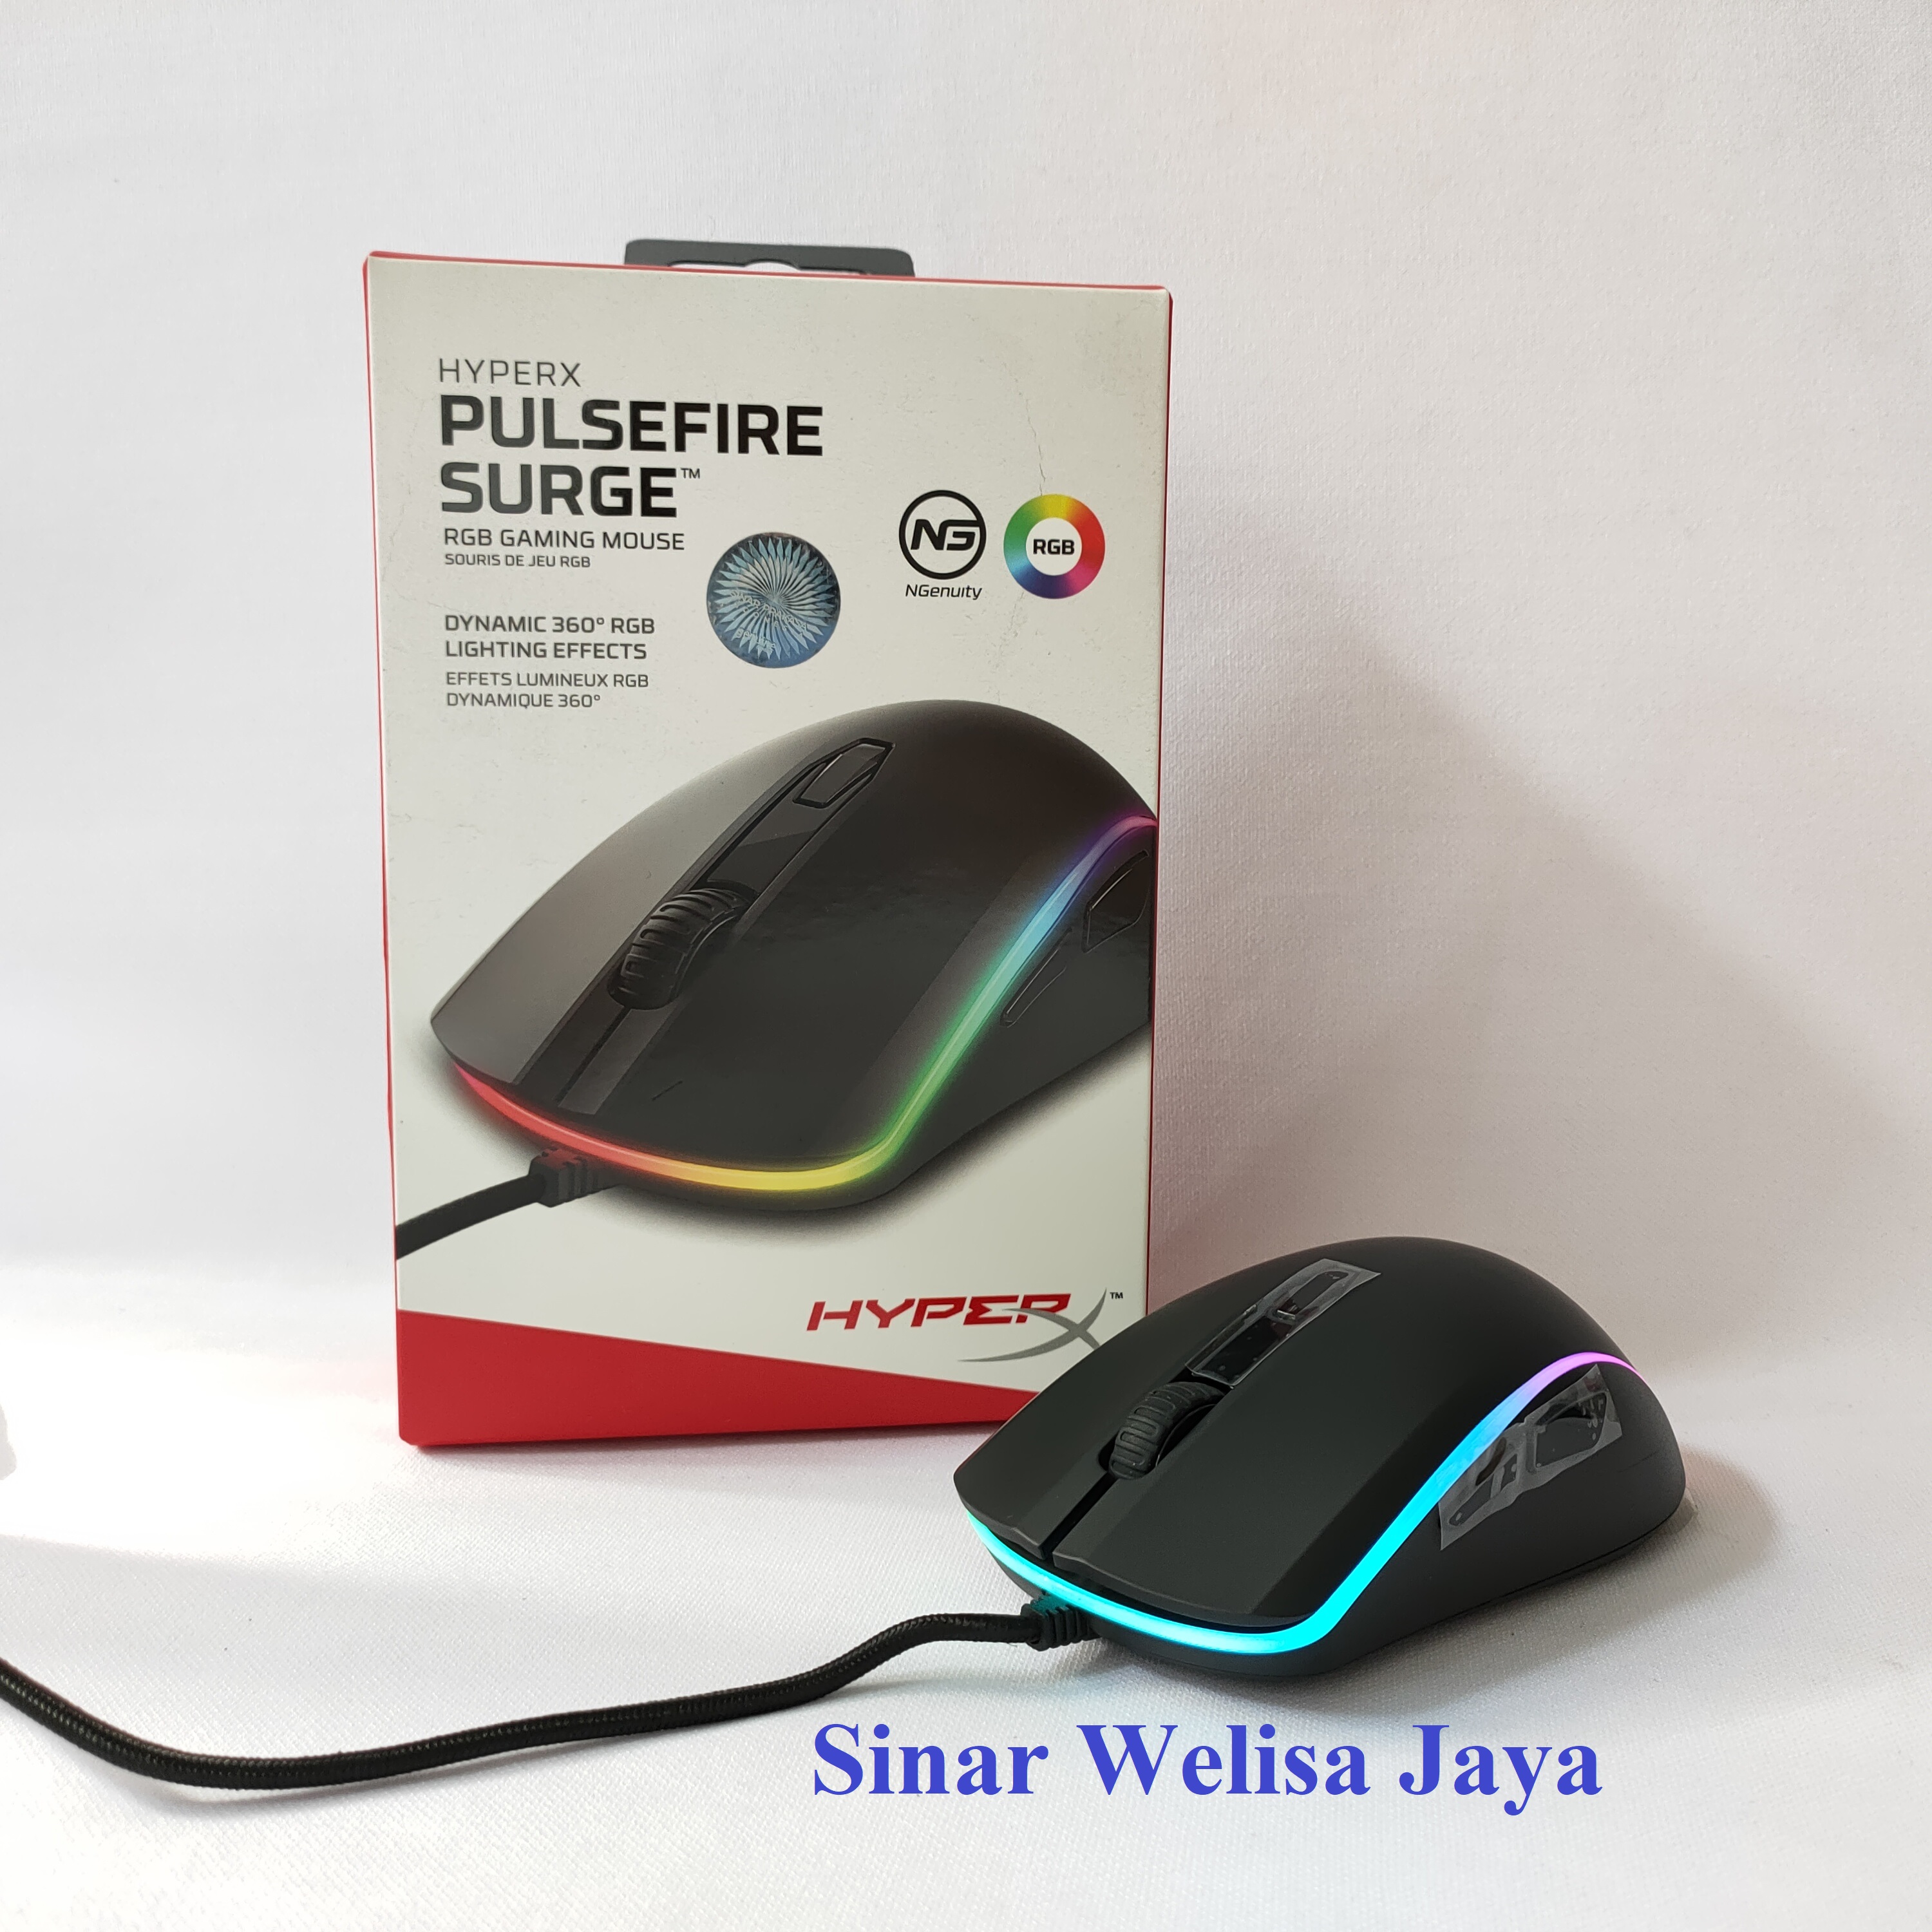 Surge Mouse Indonesia Hyperx Gaming Pulsefire Lazada |